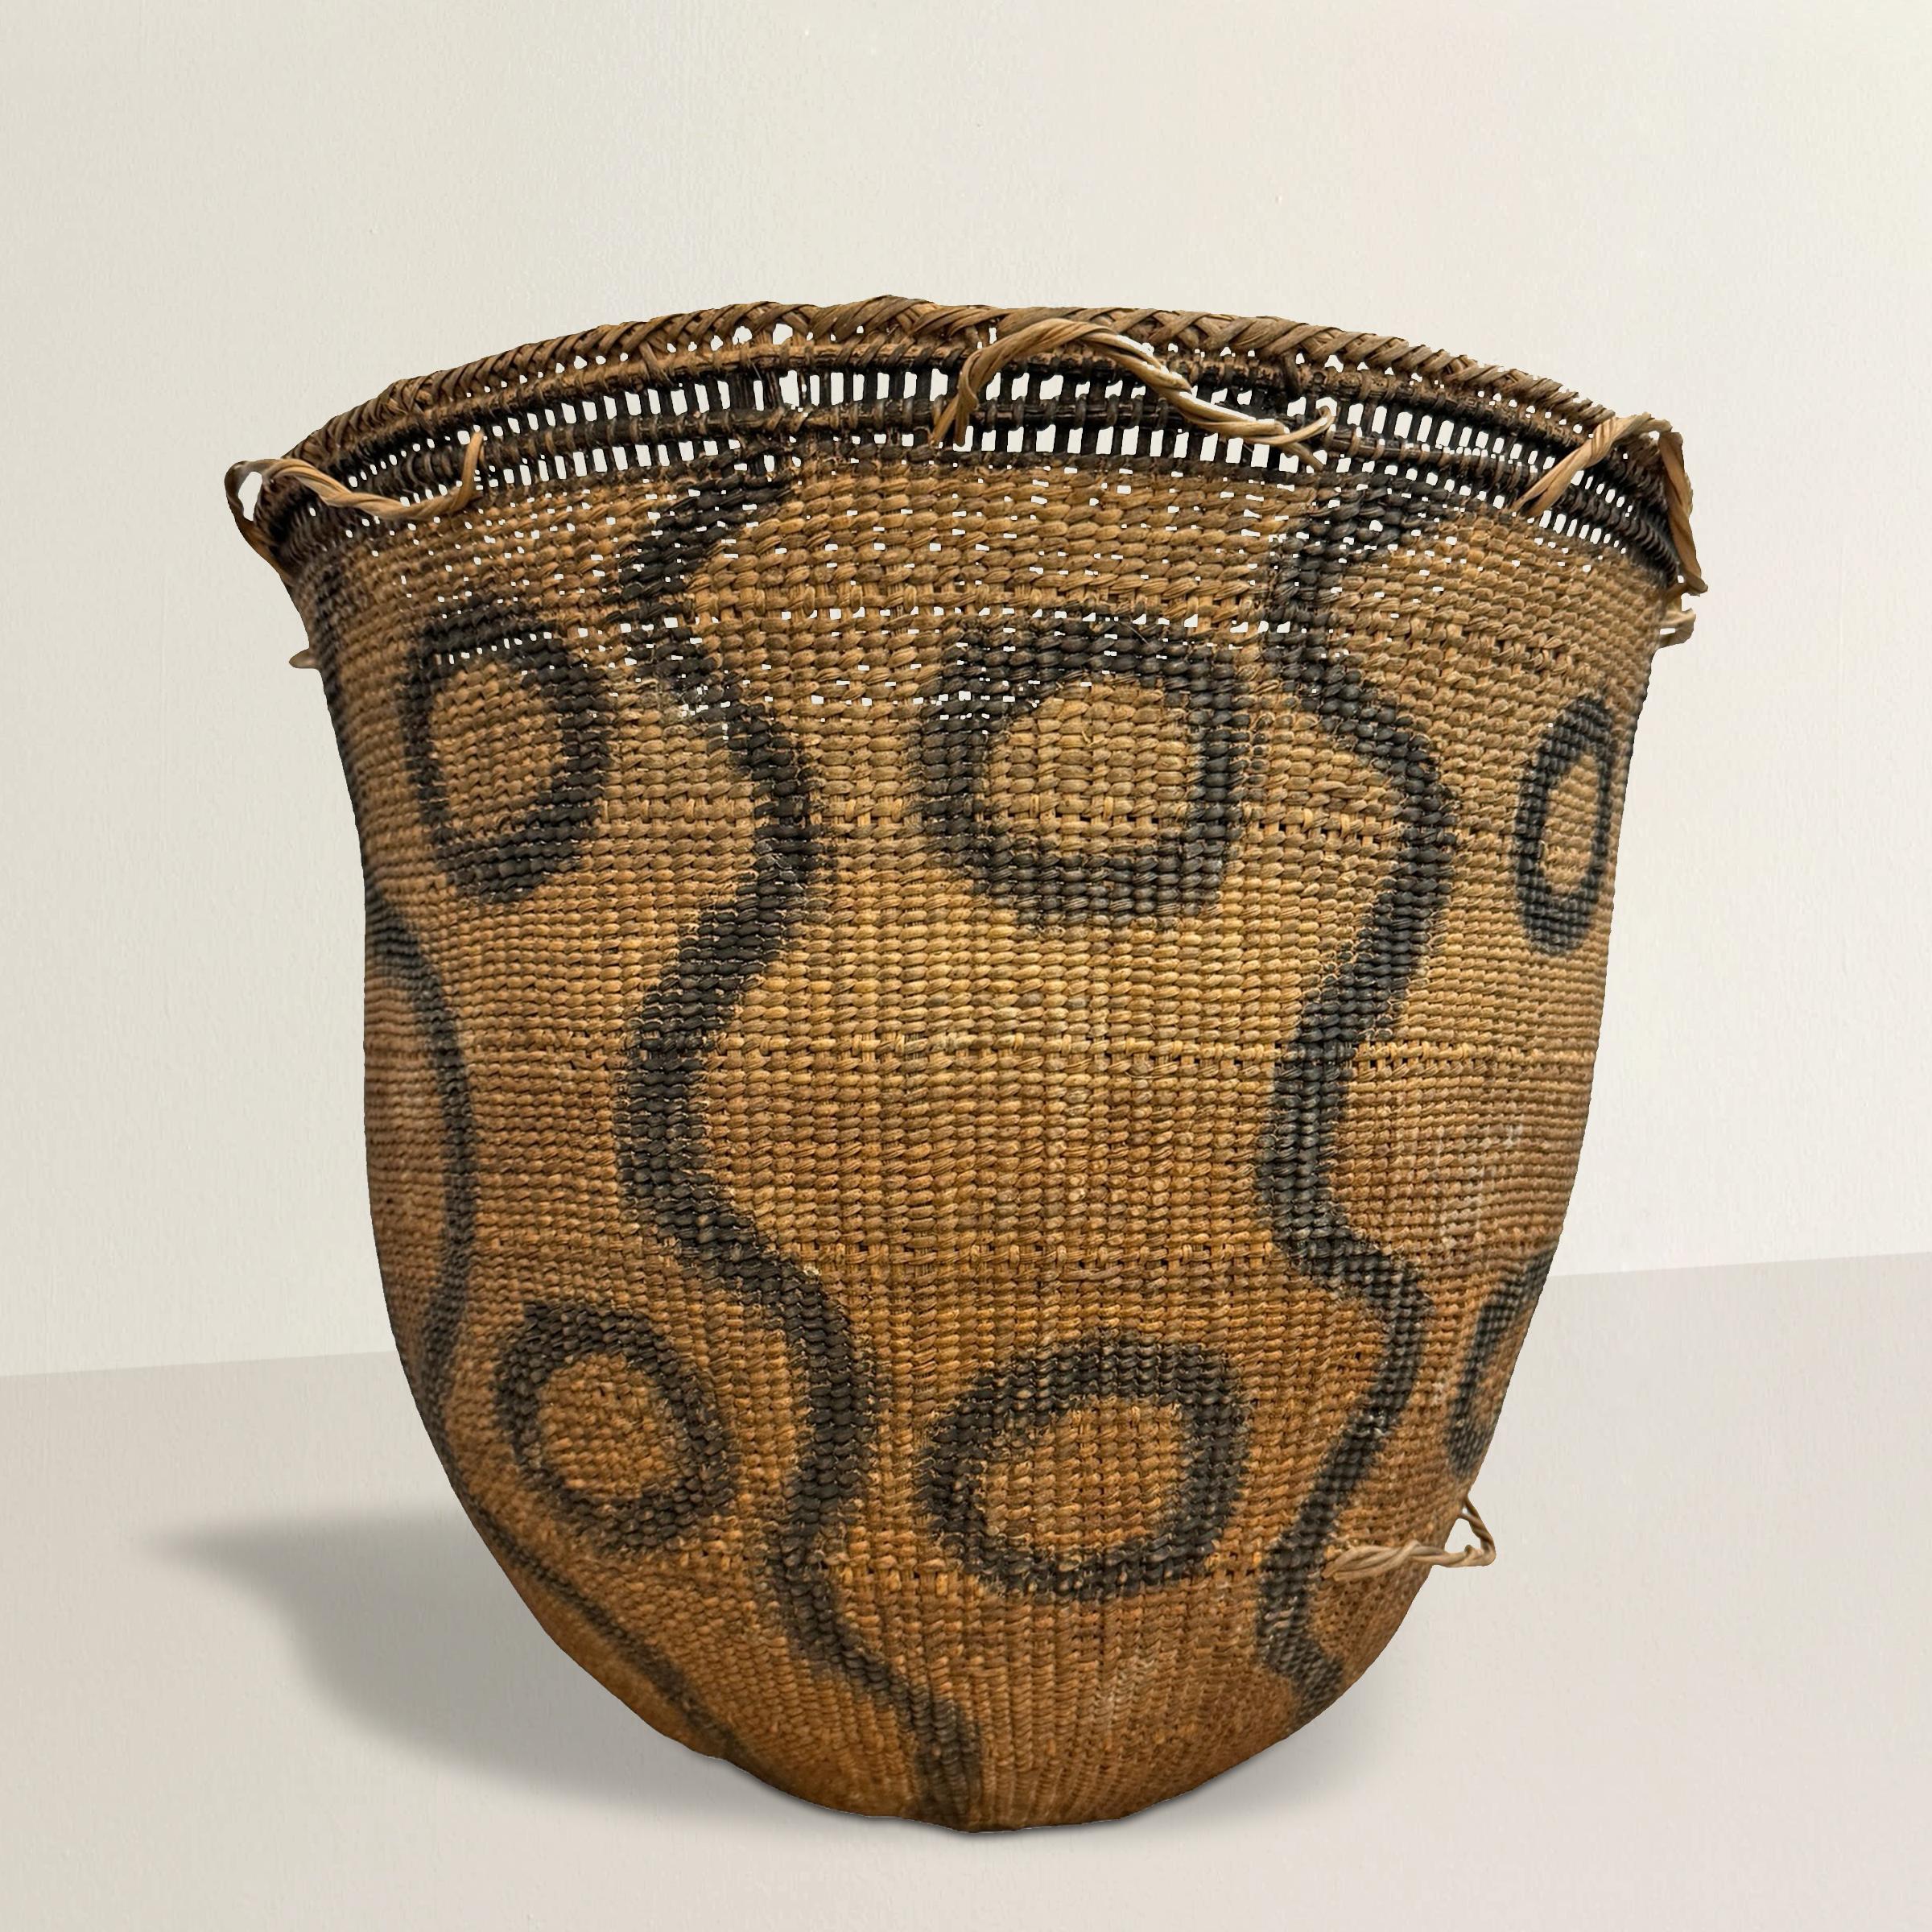 This 20th-century Yanomami basket is a remarkable example of traditional indigenous craftsmanship. Hand-woven in reeds and meticulously decorated with wavy lines and circles painted with ash, this basket is not only a practical tool but also a